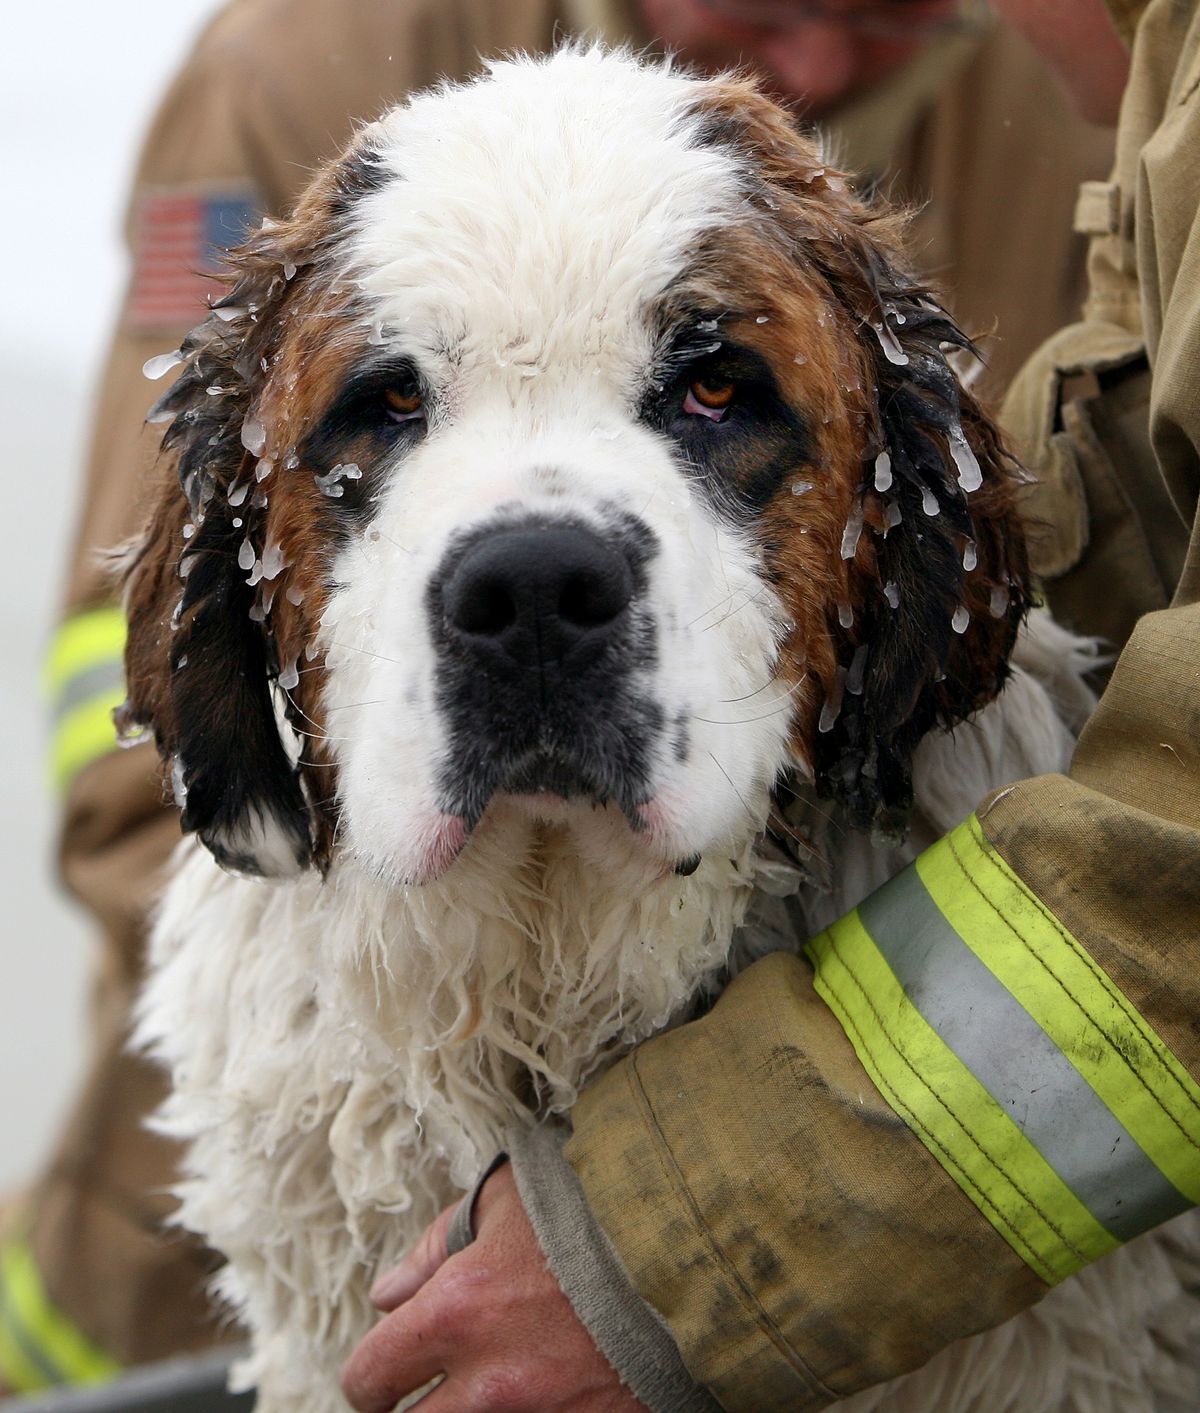 Duke is held by a firefighter after his rescue. He was taken to a clinic and is doing well. (The Spokesman-Review)